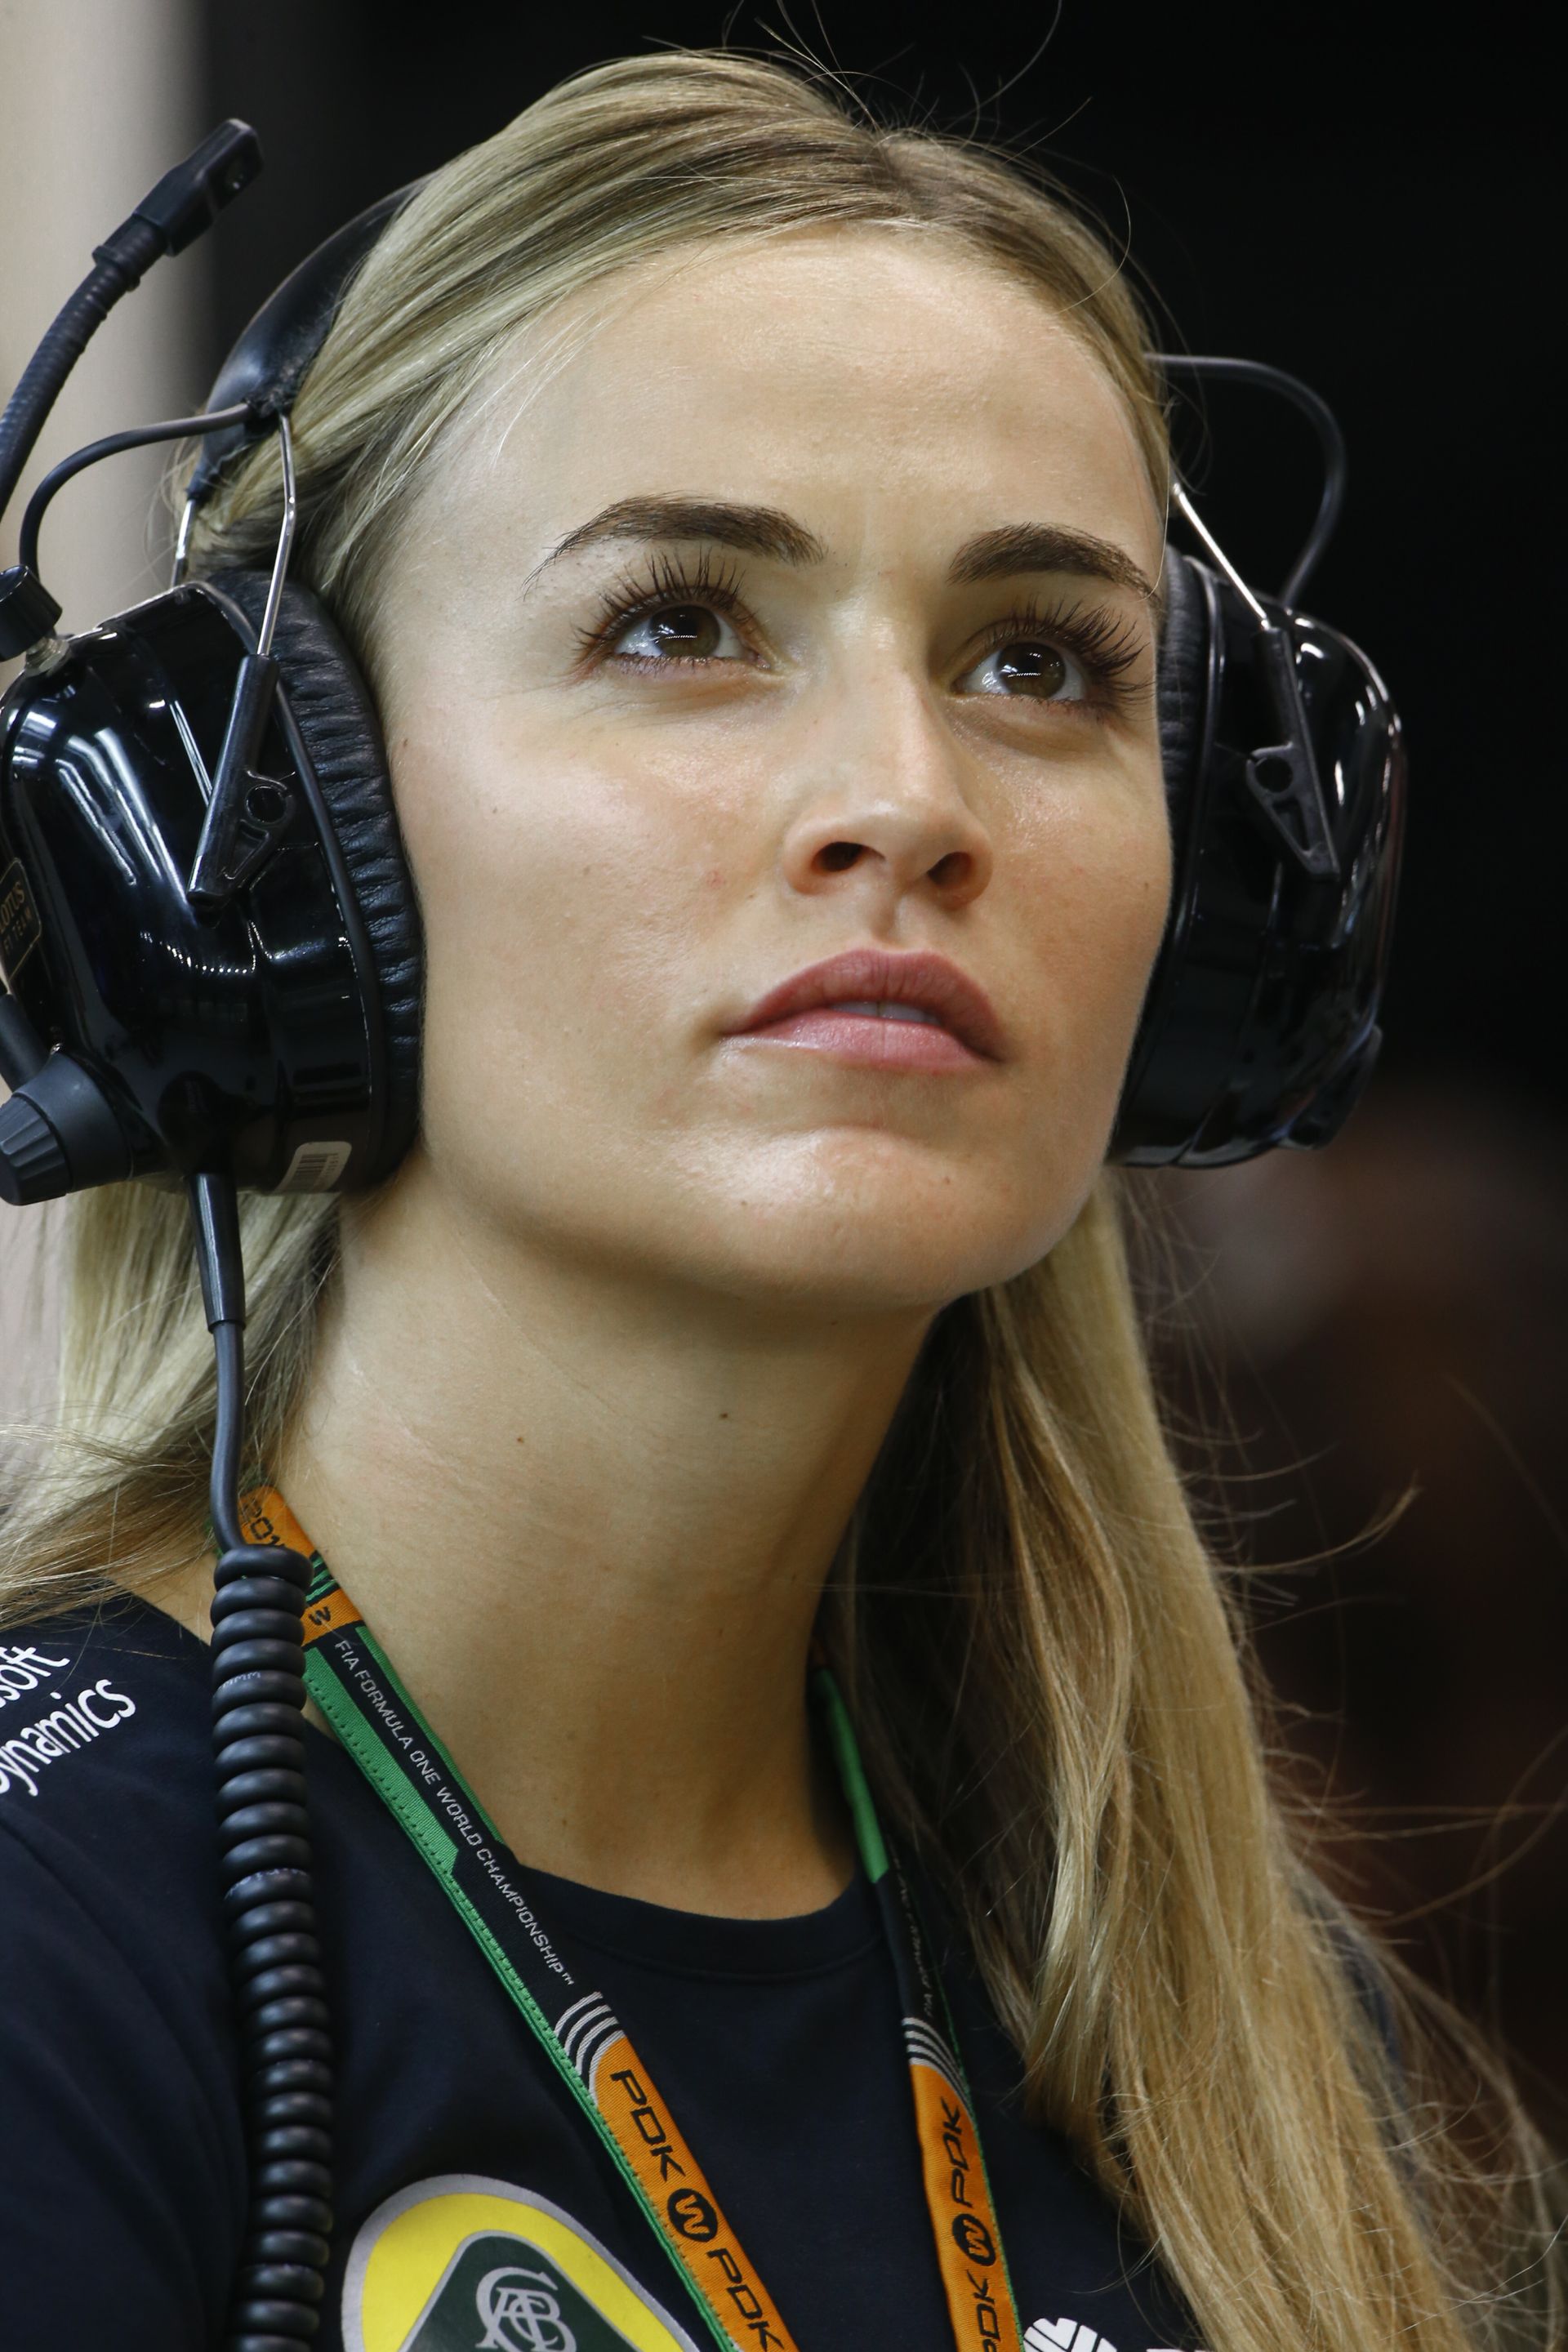 JORDA Carmen lotus f1 gp development driver ambiance portrait during the 2015 Formula One World Championship, Singapore Grand Prix from September 16th to 20th 2015 in Singapour. Photo Frederic Le Floc'h / DPPI